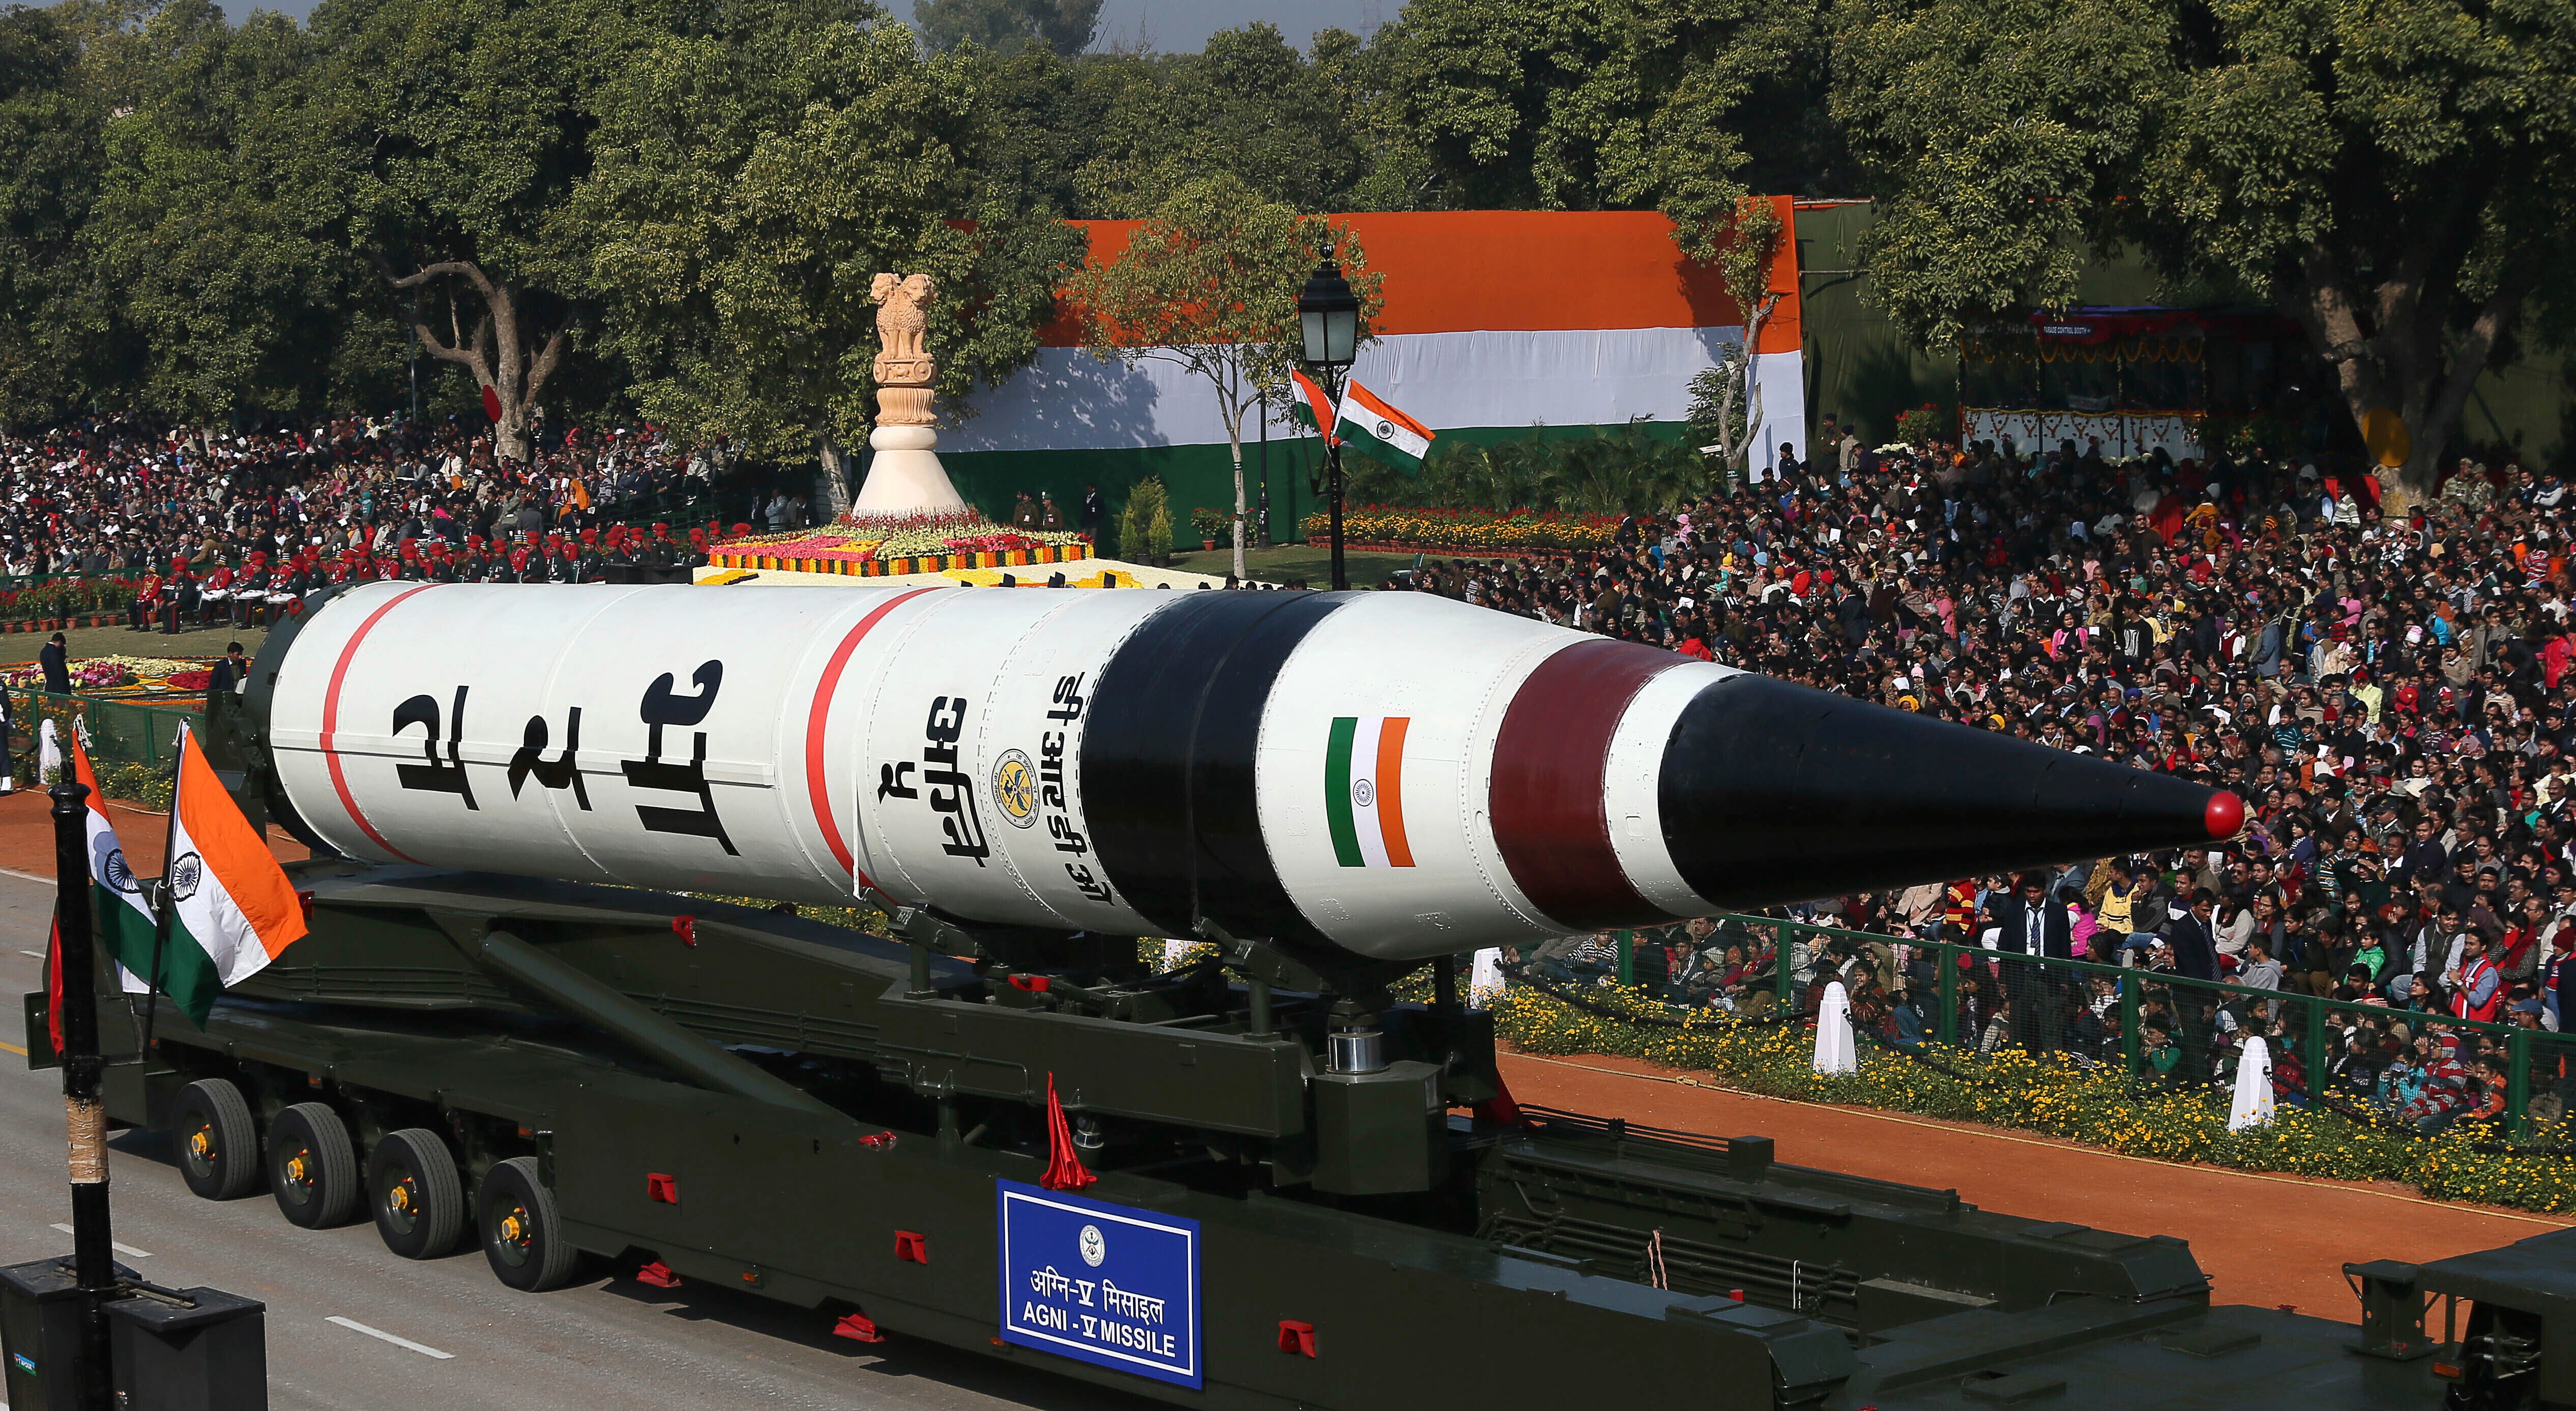 An Agni-v ballistic missile displayed during Republic Day parade in Delhi, India in 2013